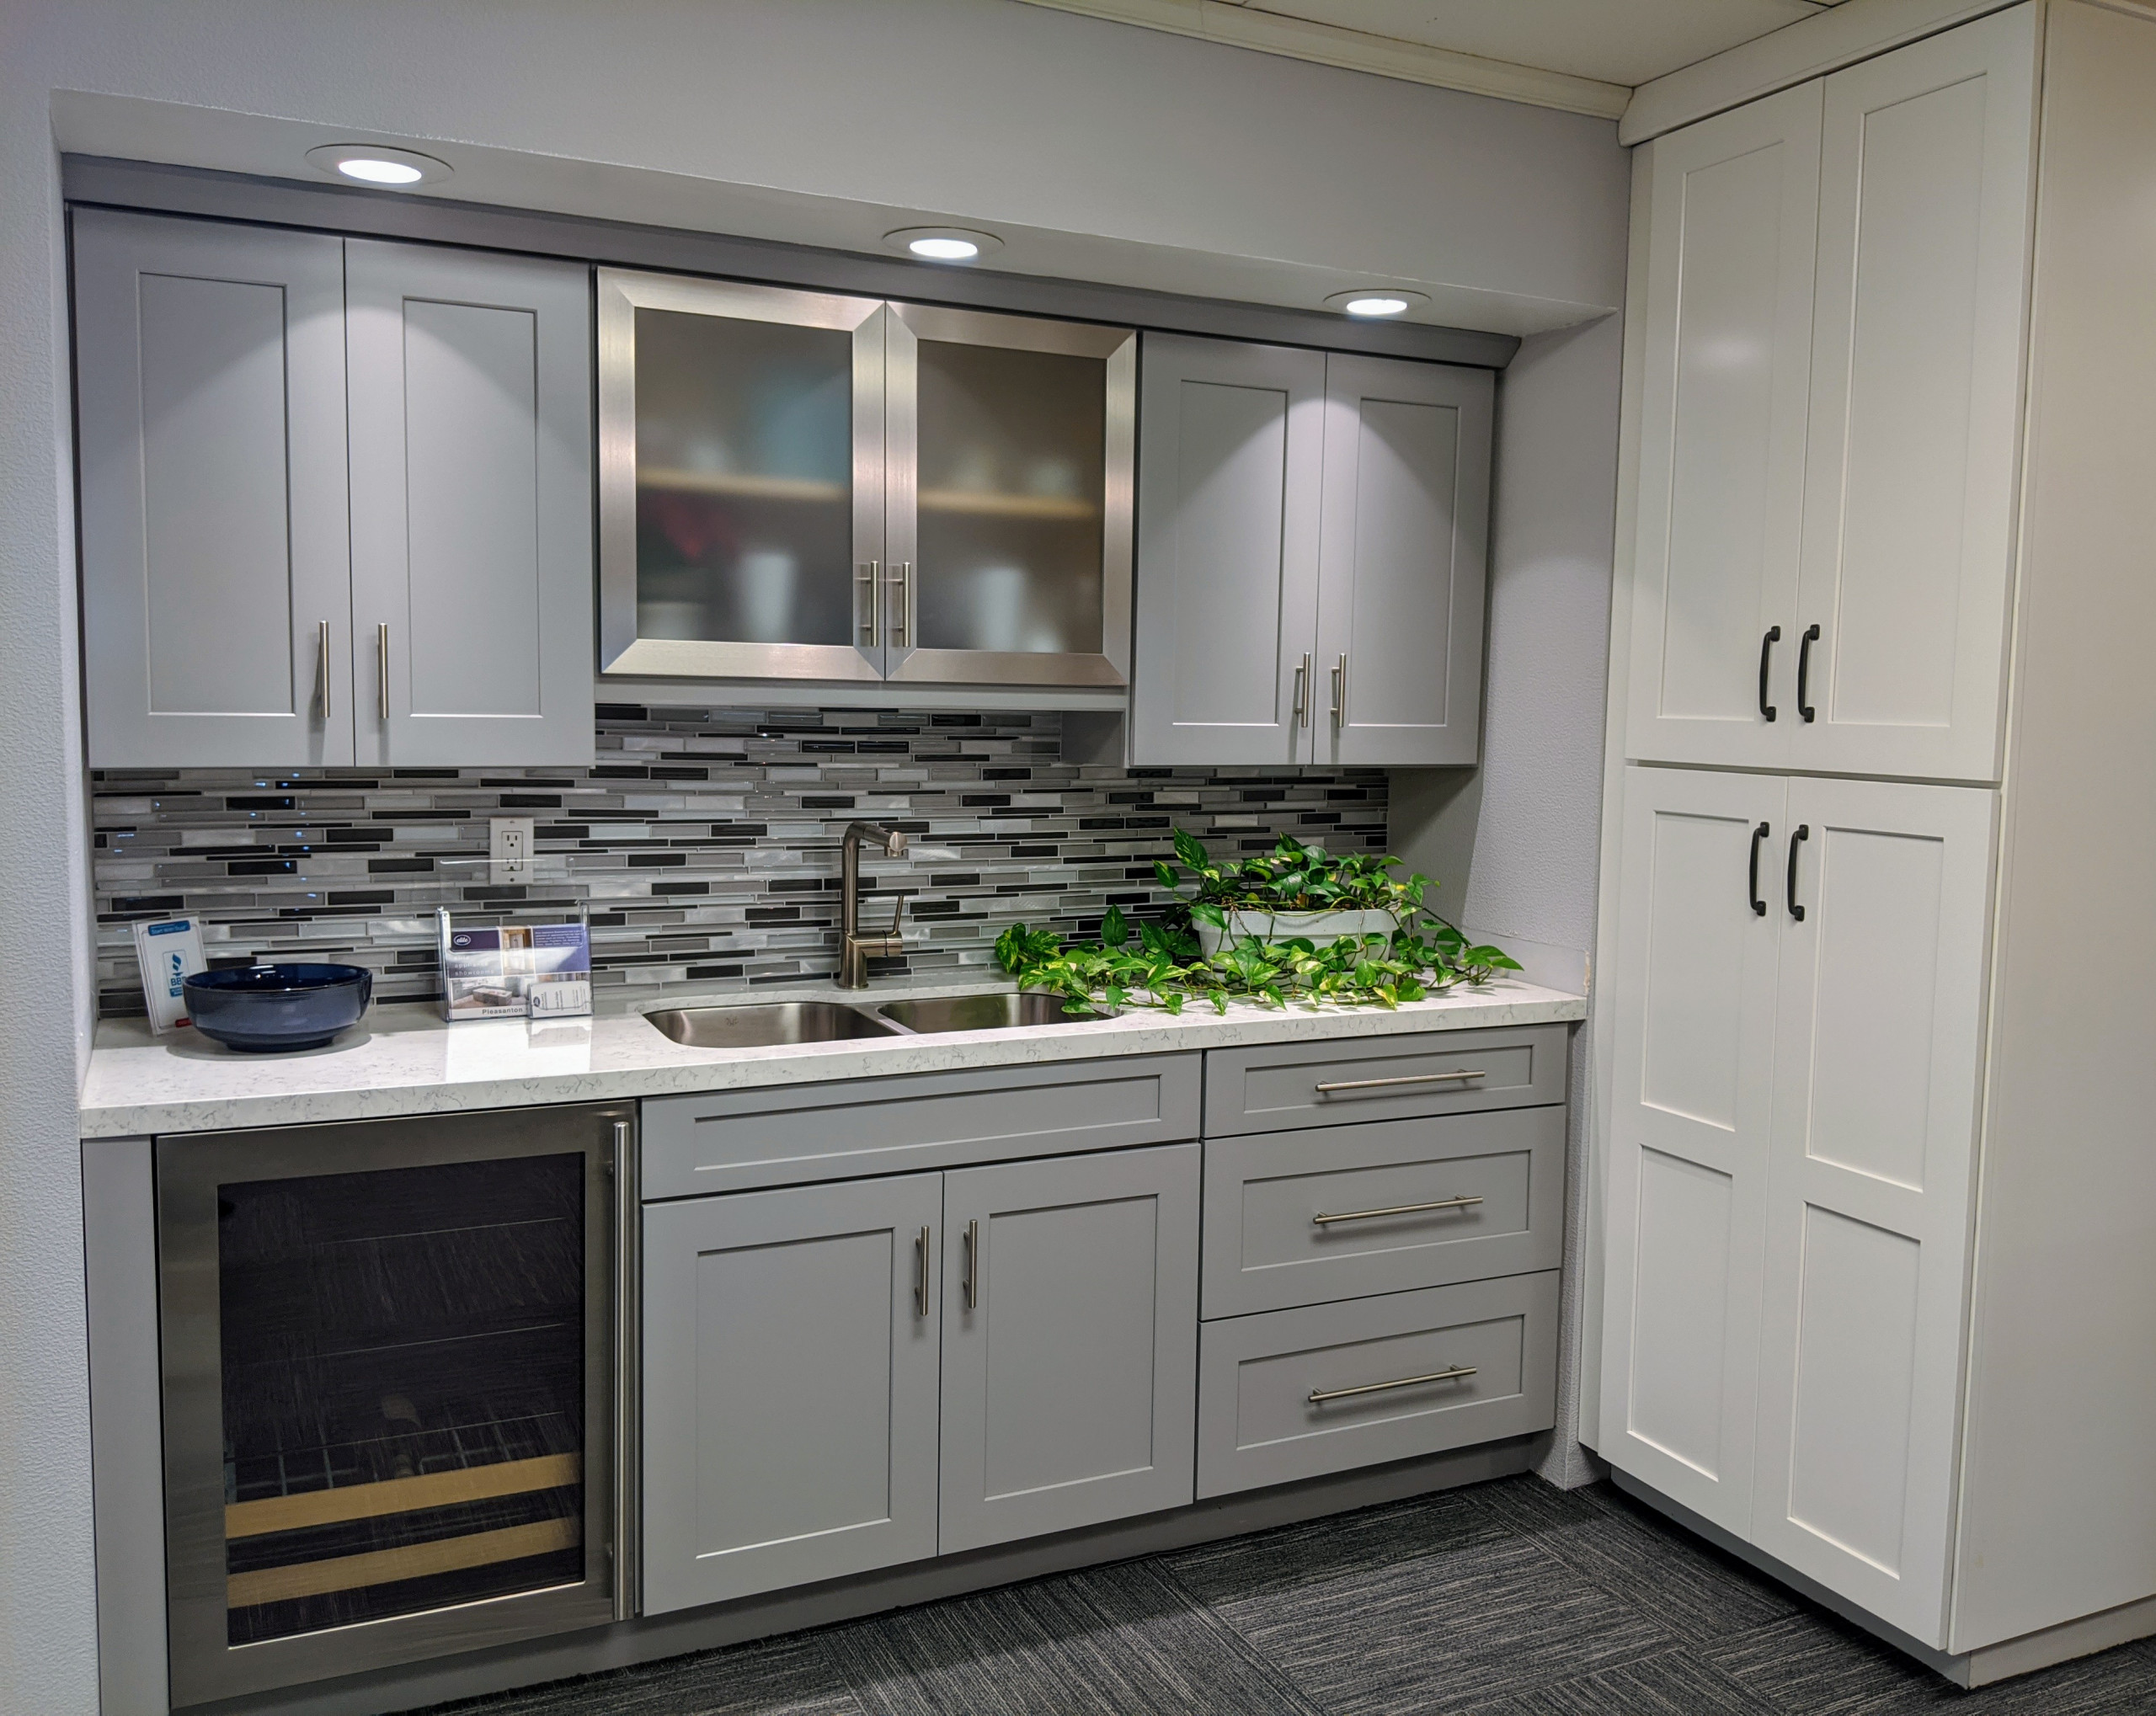 Waypoint Cabinets Maple With 650f Door In Stone Grey Linen White Paint Contemporary Kitchen San Francisco By Cabinets Etc Houzz